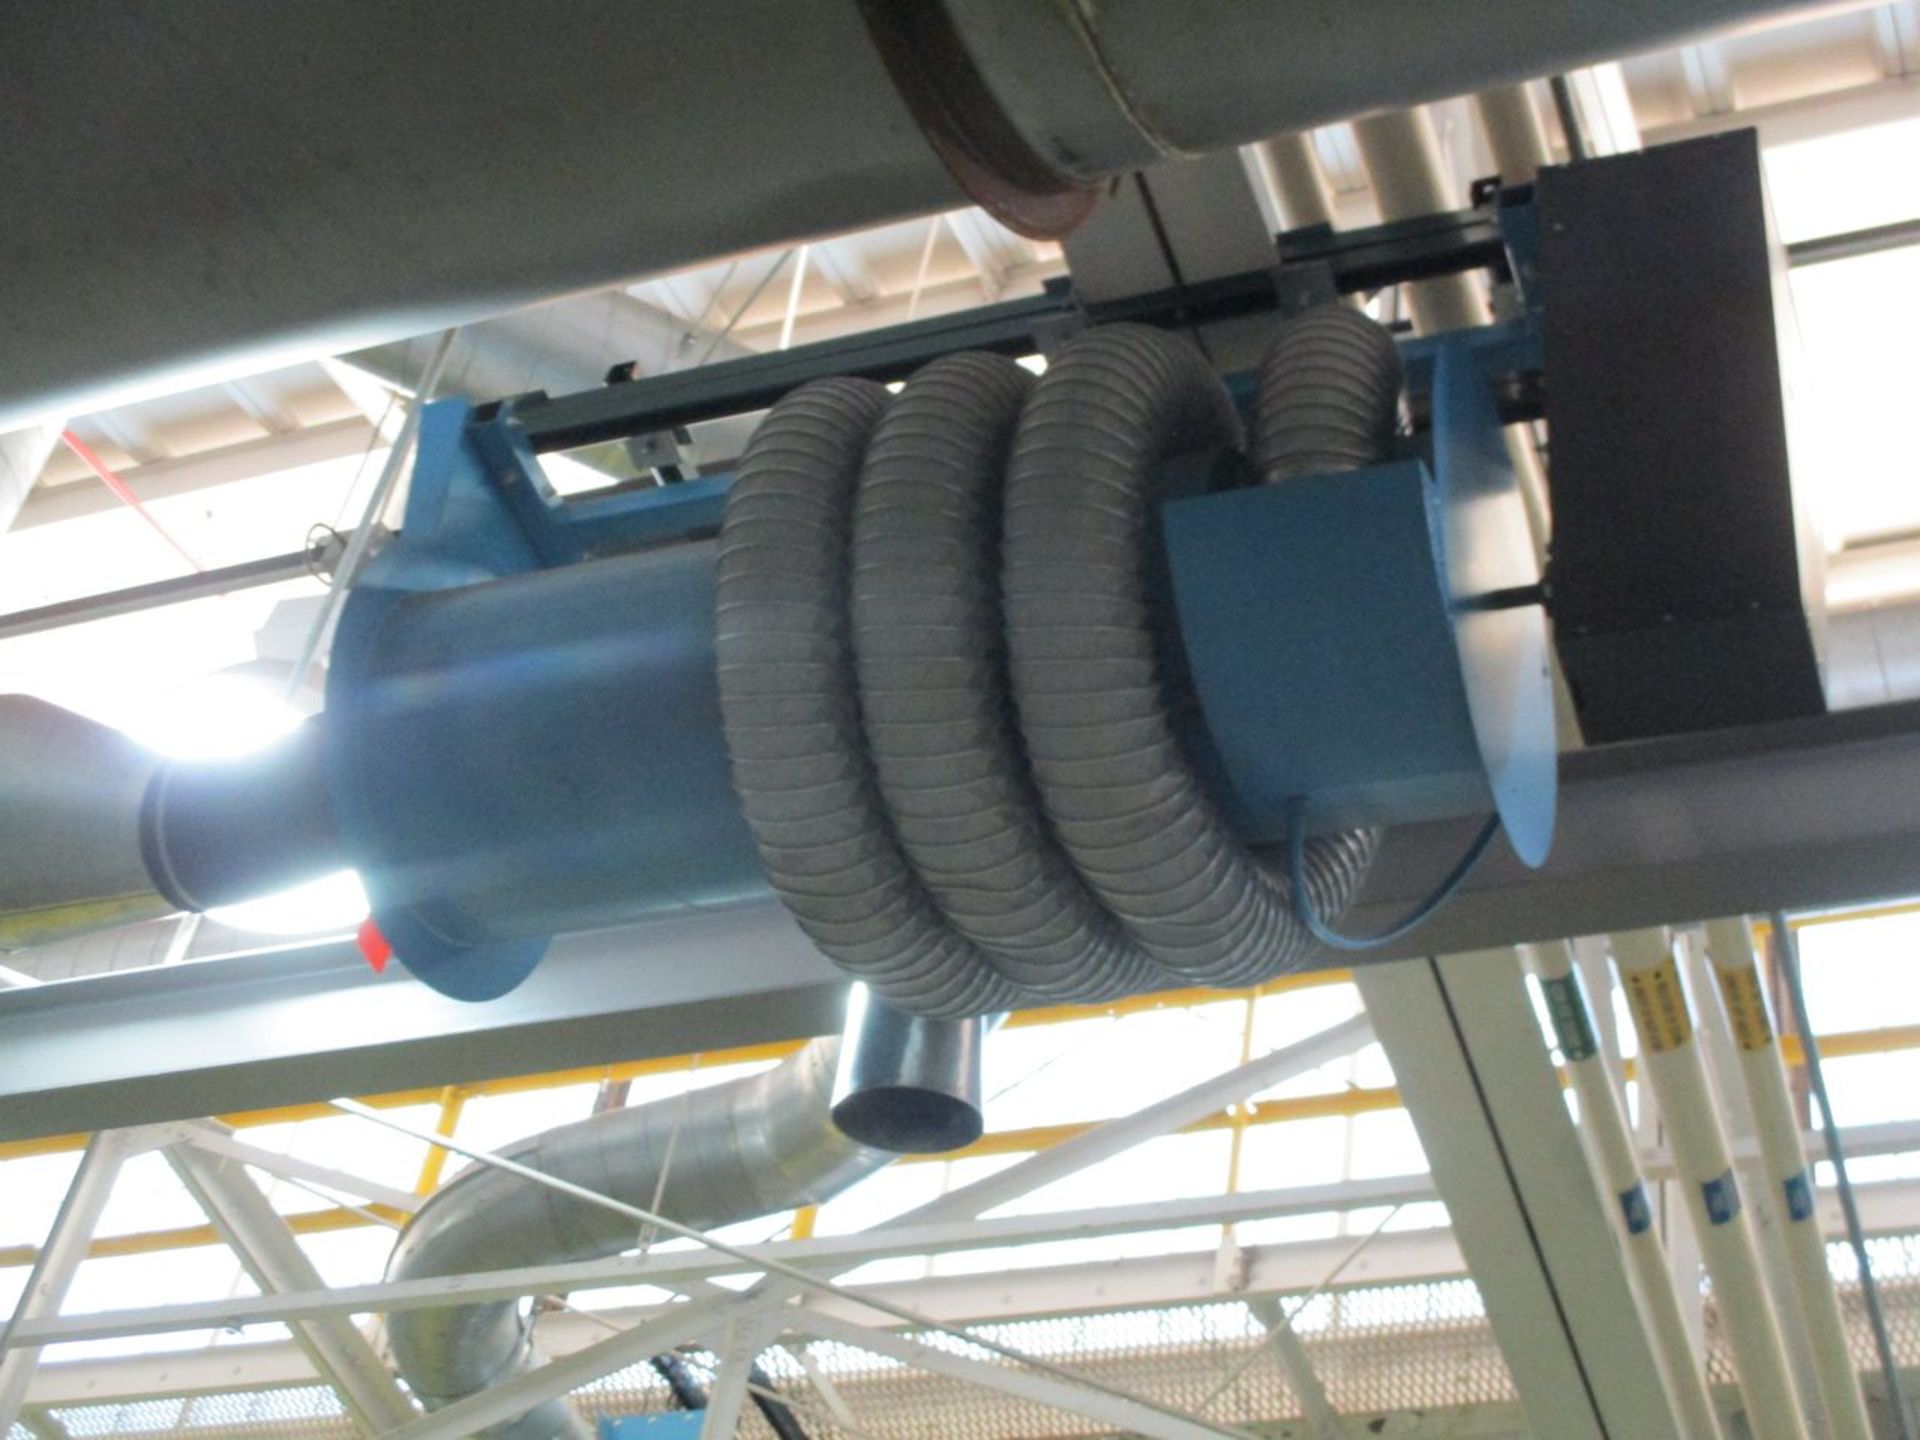 (2) Car-Mon Spring Operated Exhaust Tubing Storage Reel, model TSR-S (Ceiling Mounted) (Chassis Dyno